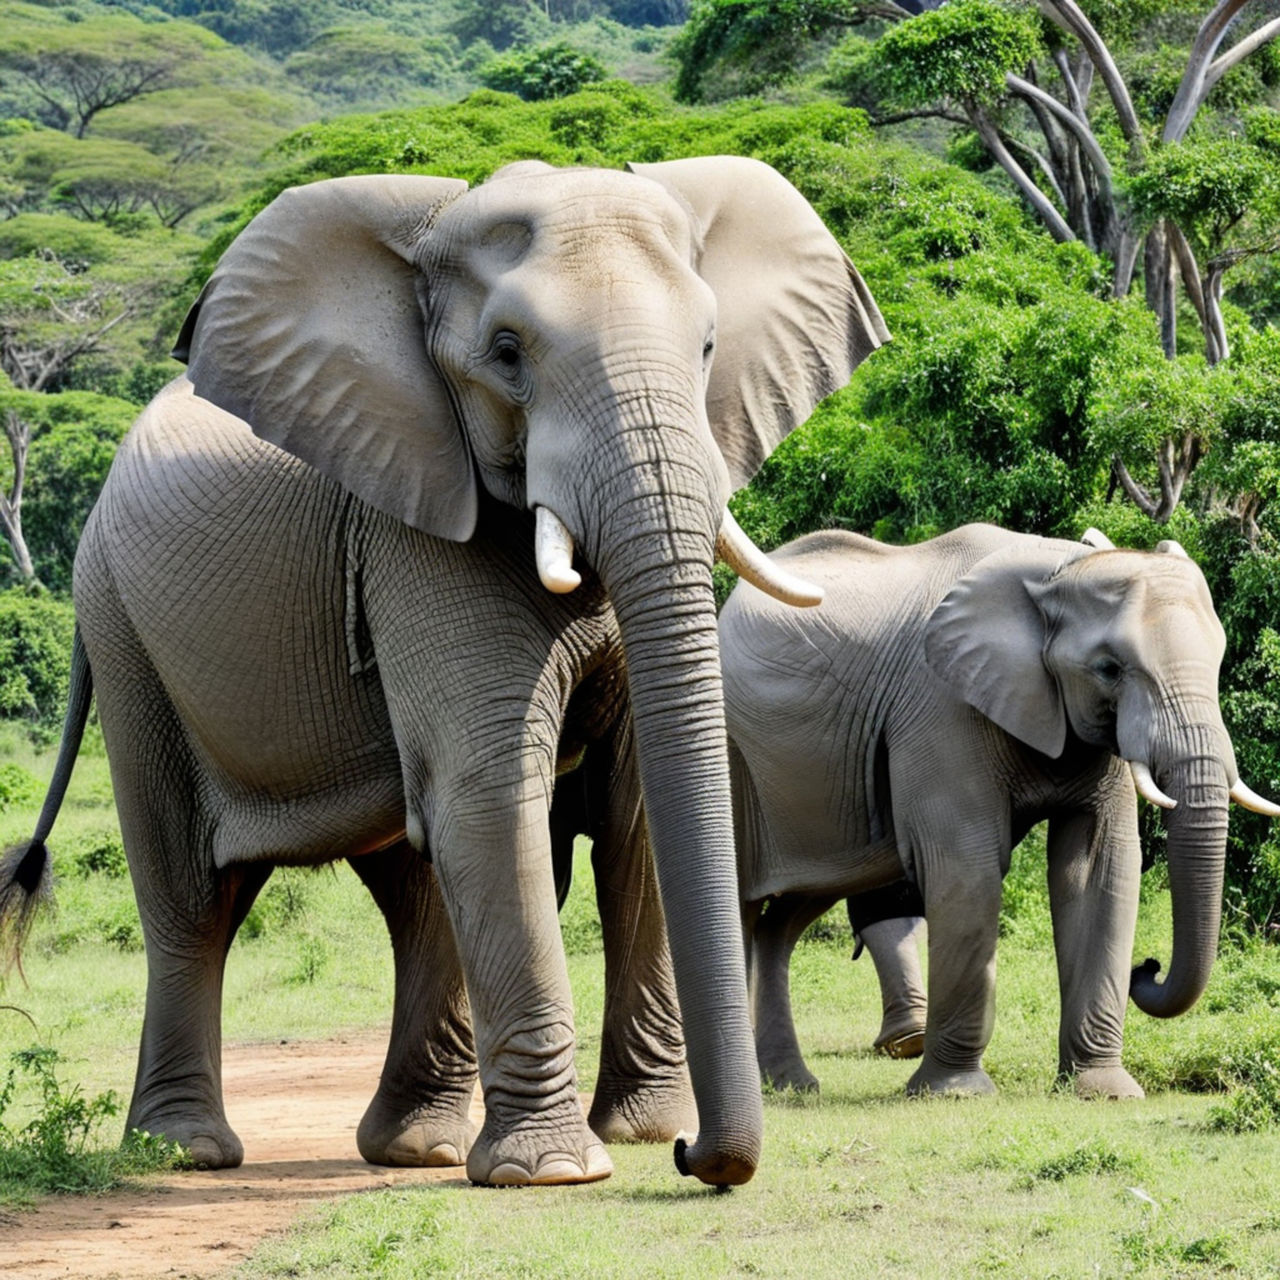 indian elephant, animal, animal themes, elephant, animal wildlife, mammal, wildlife, african elephant, group of animals, safari, plant, animal body part, no people, nature, tree, day, environment, animal family, young animal, animal trunk, zoo, outdoors, grass, land, togetherness, side view, full length, two animals, adventure, travel destinations, standing, beauty in nature, tourism, walking, landscape